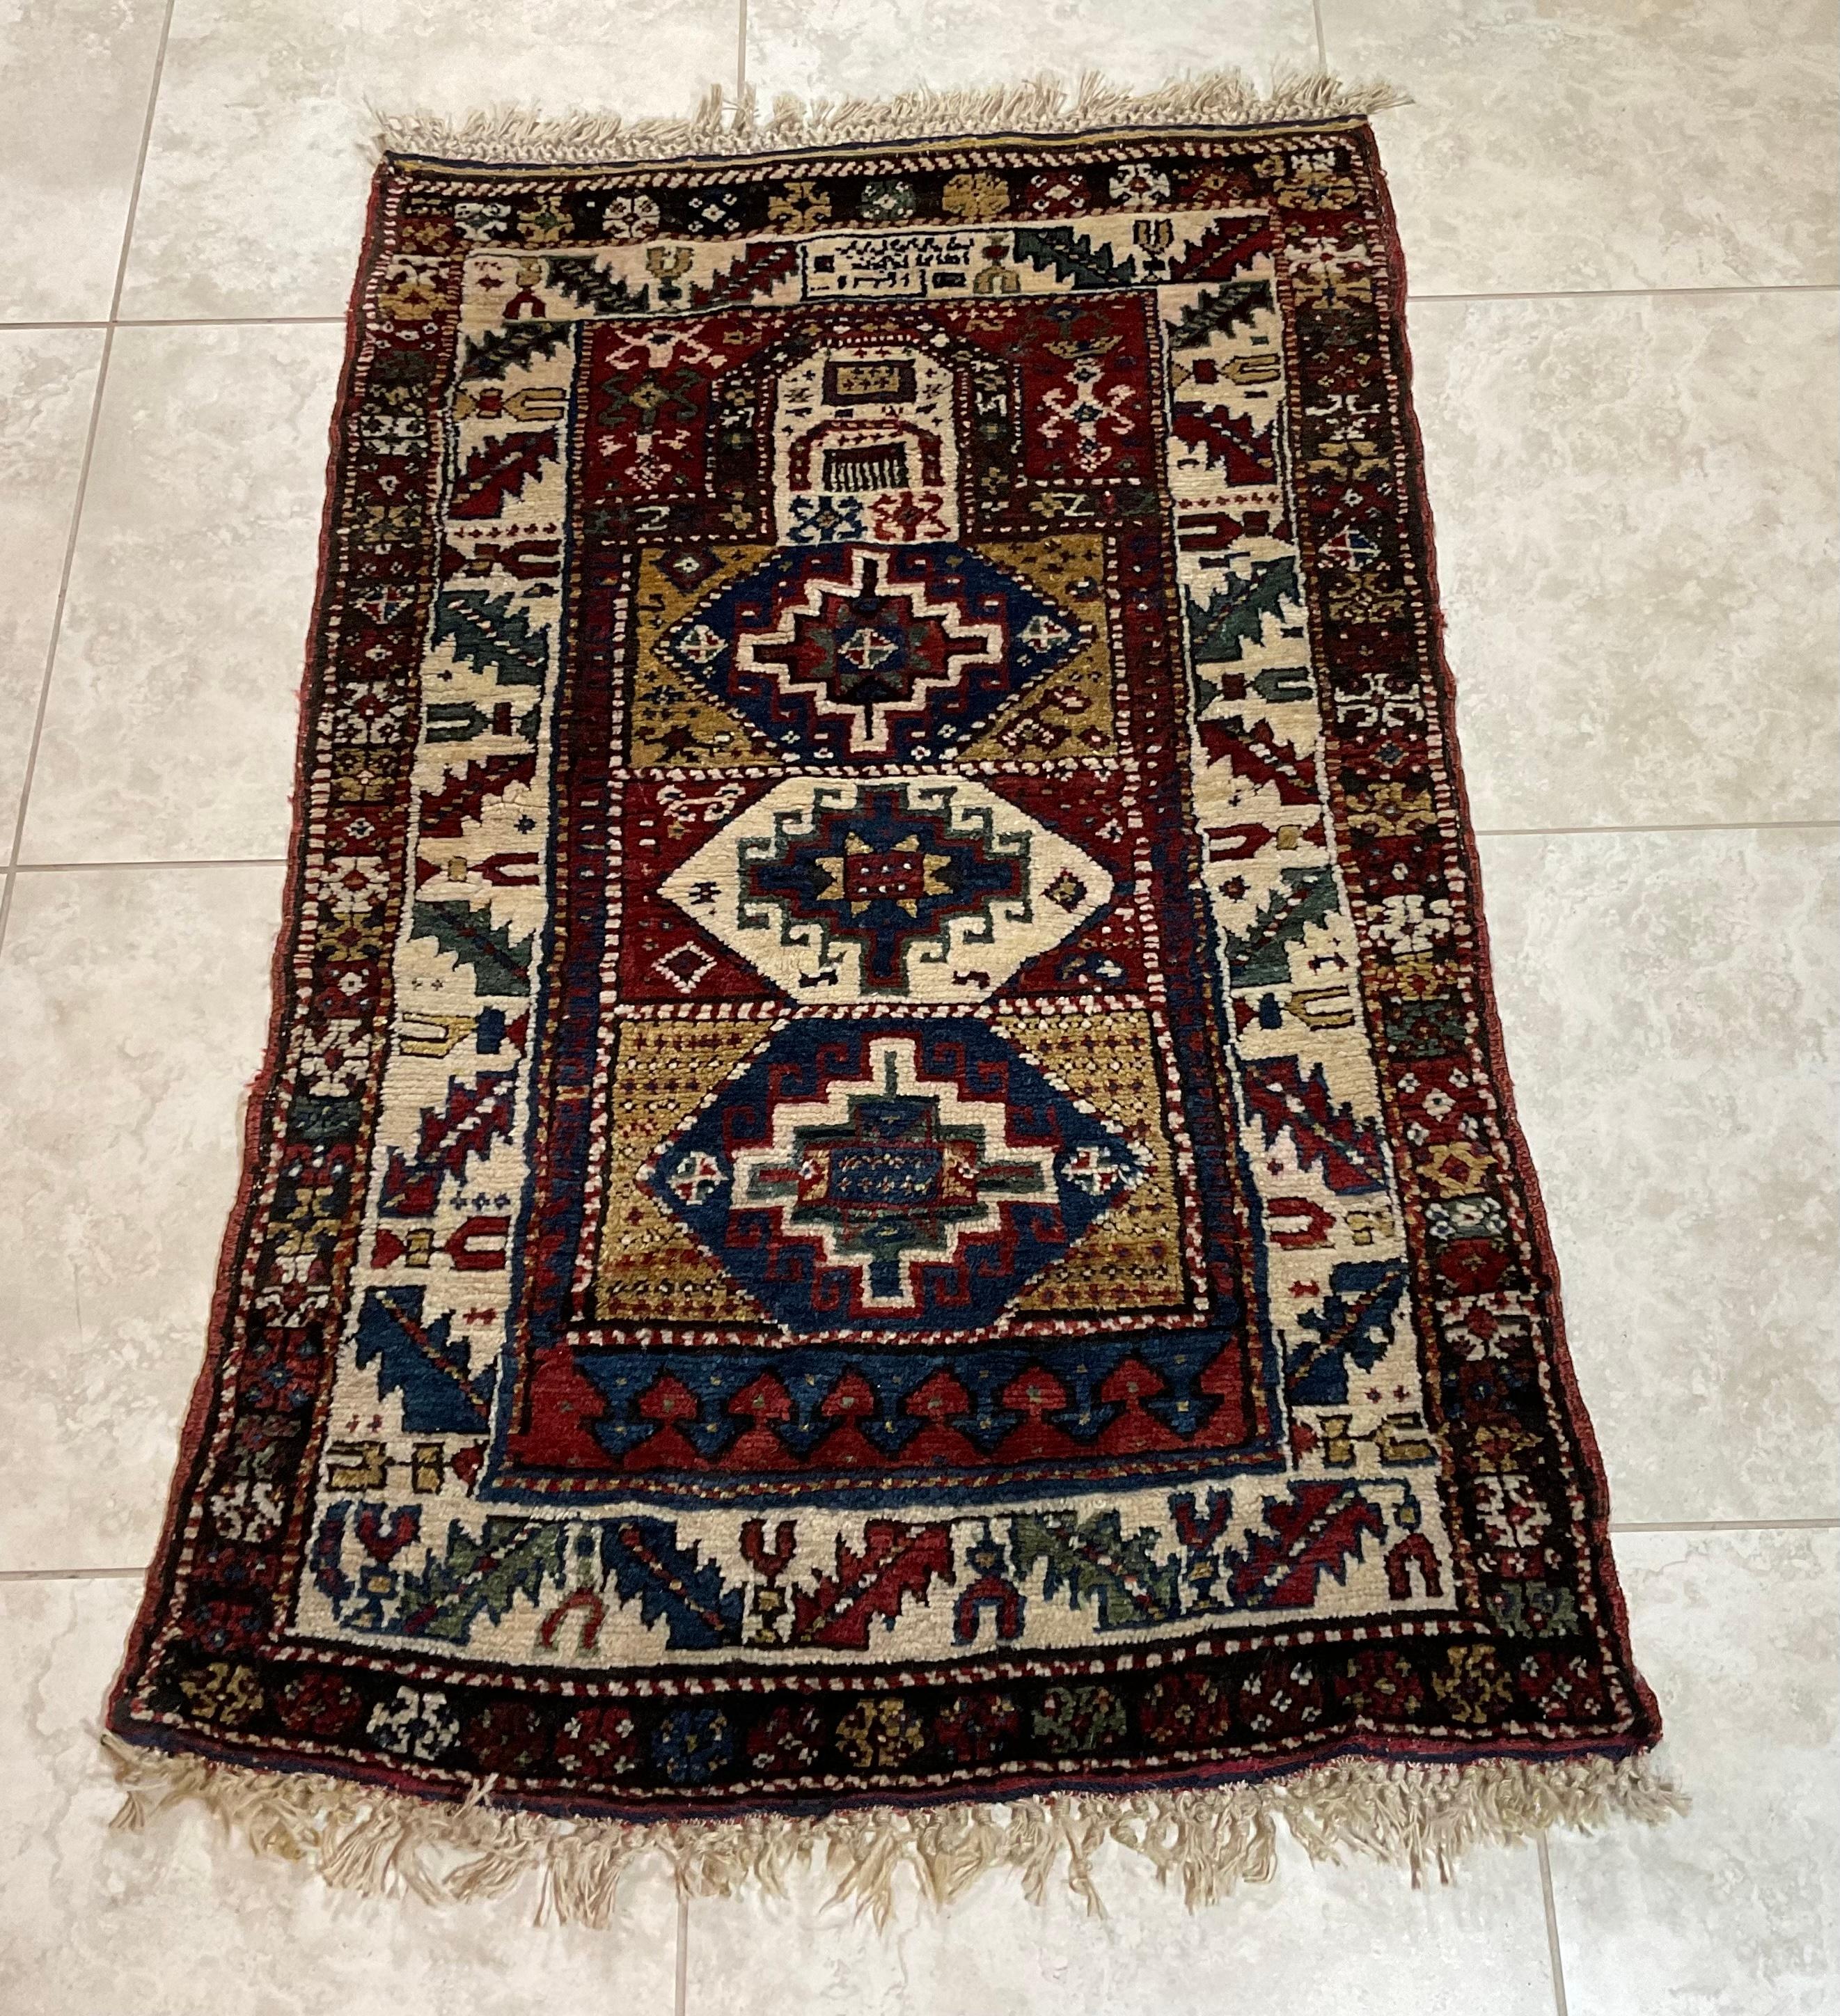 Elegant tribal Caucasian Kazak rug made of fine wool with beautifully executed geometric motifs ,three medallions surrounded by intricate Borders. The rug handwoven by nomadic family . Full pile and original fringes, very strong foundation soft